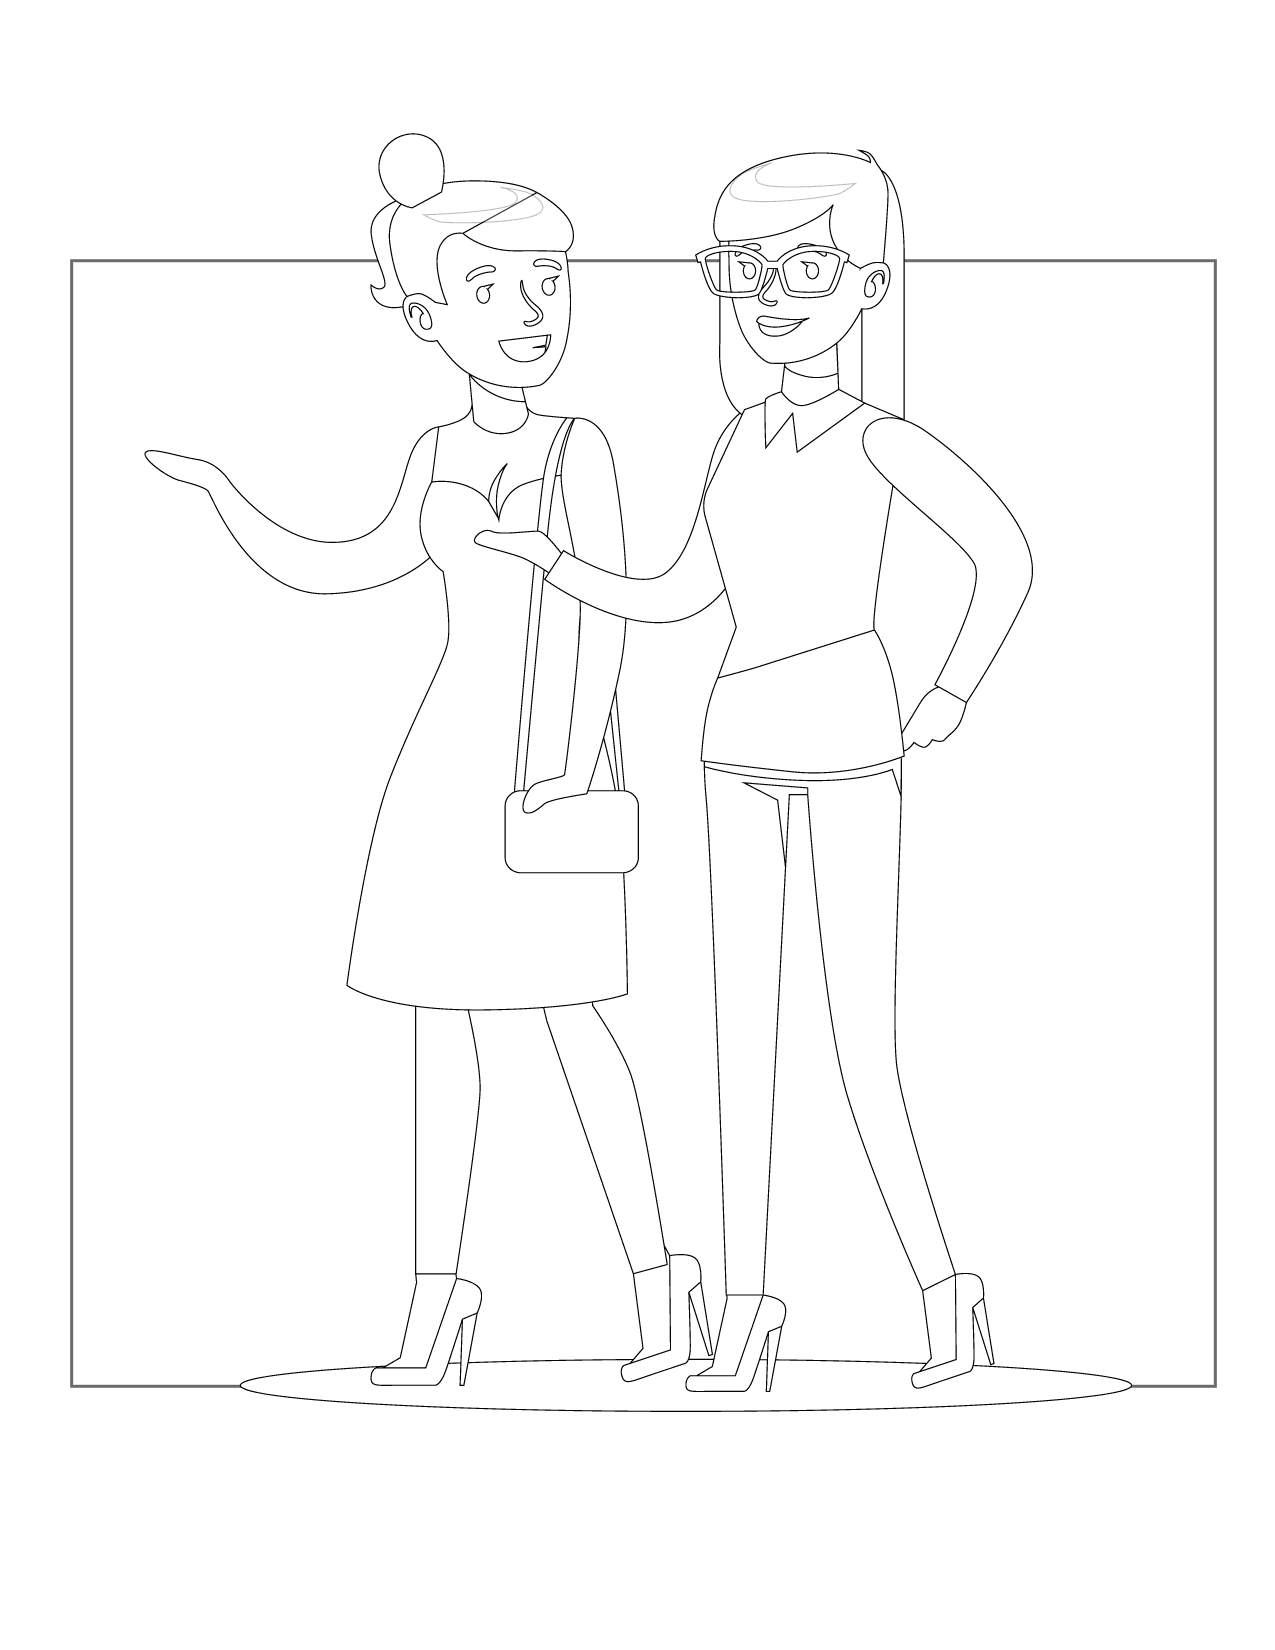 Friends Walking And Talking Coloring Page